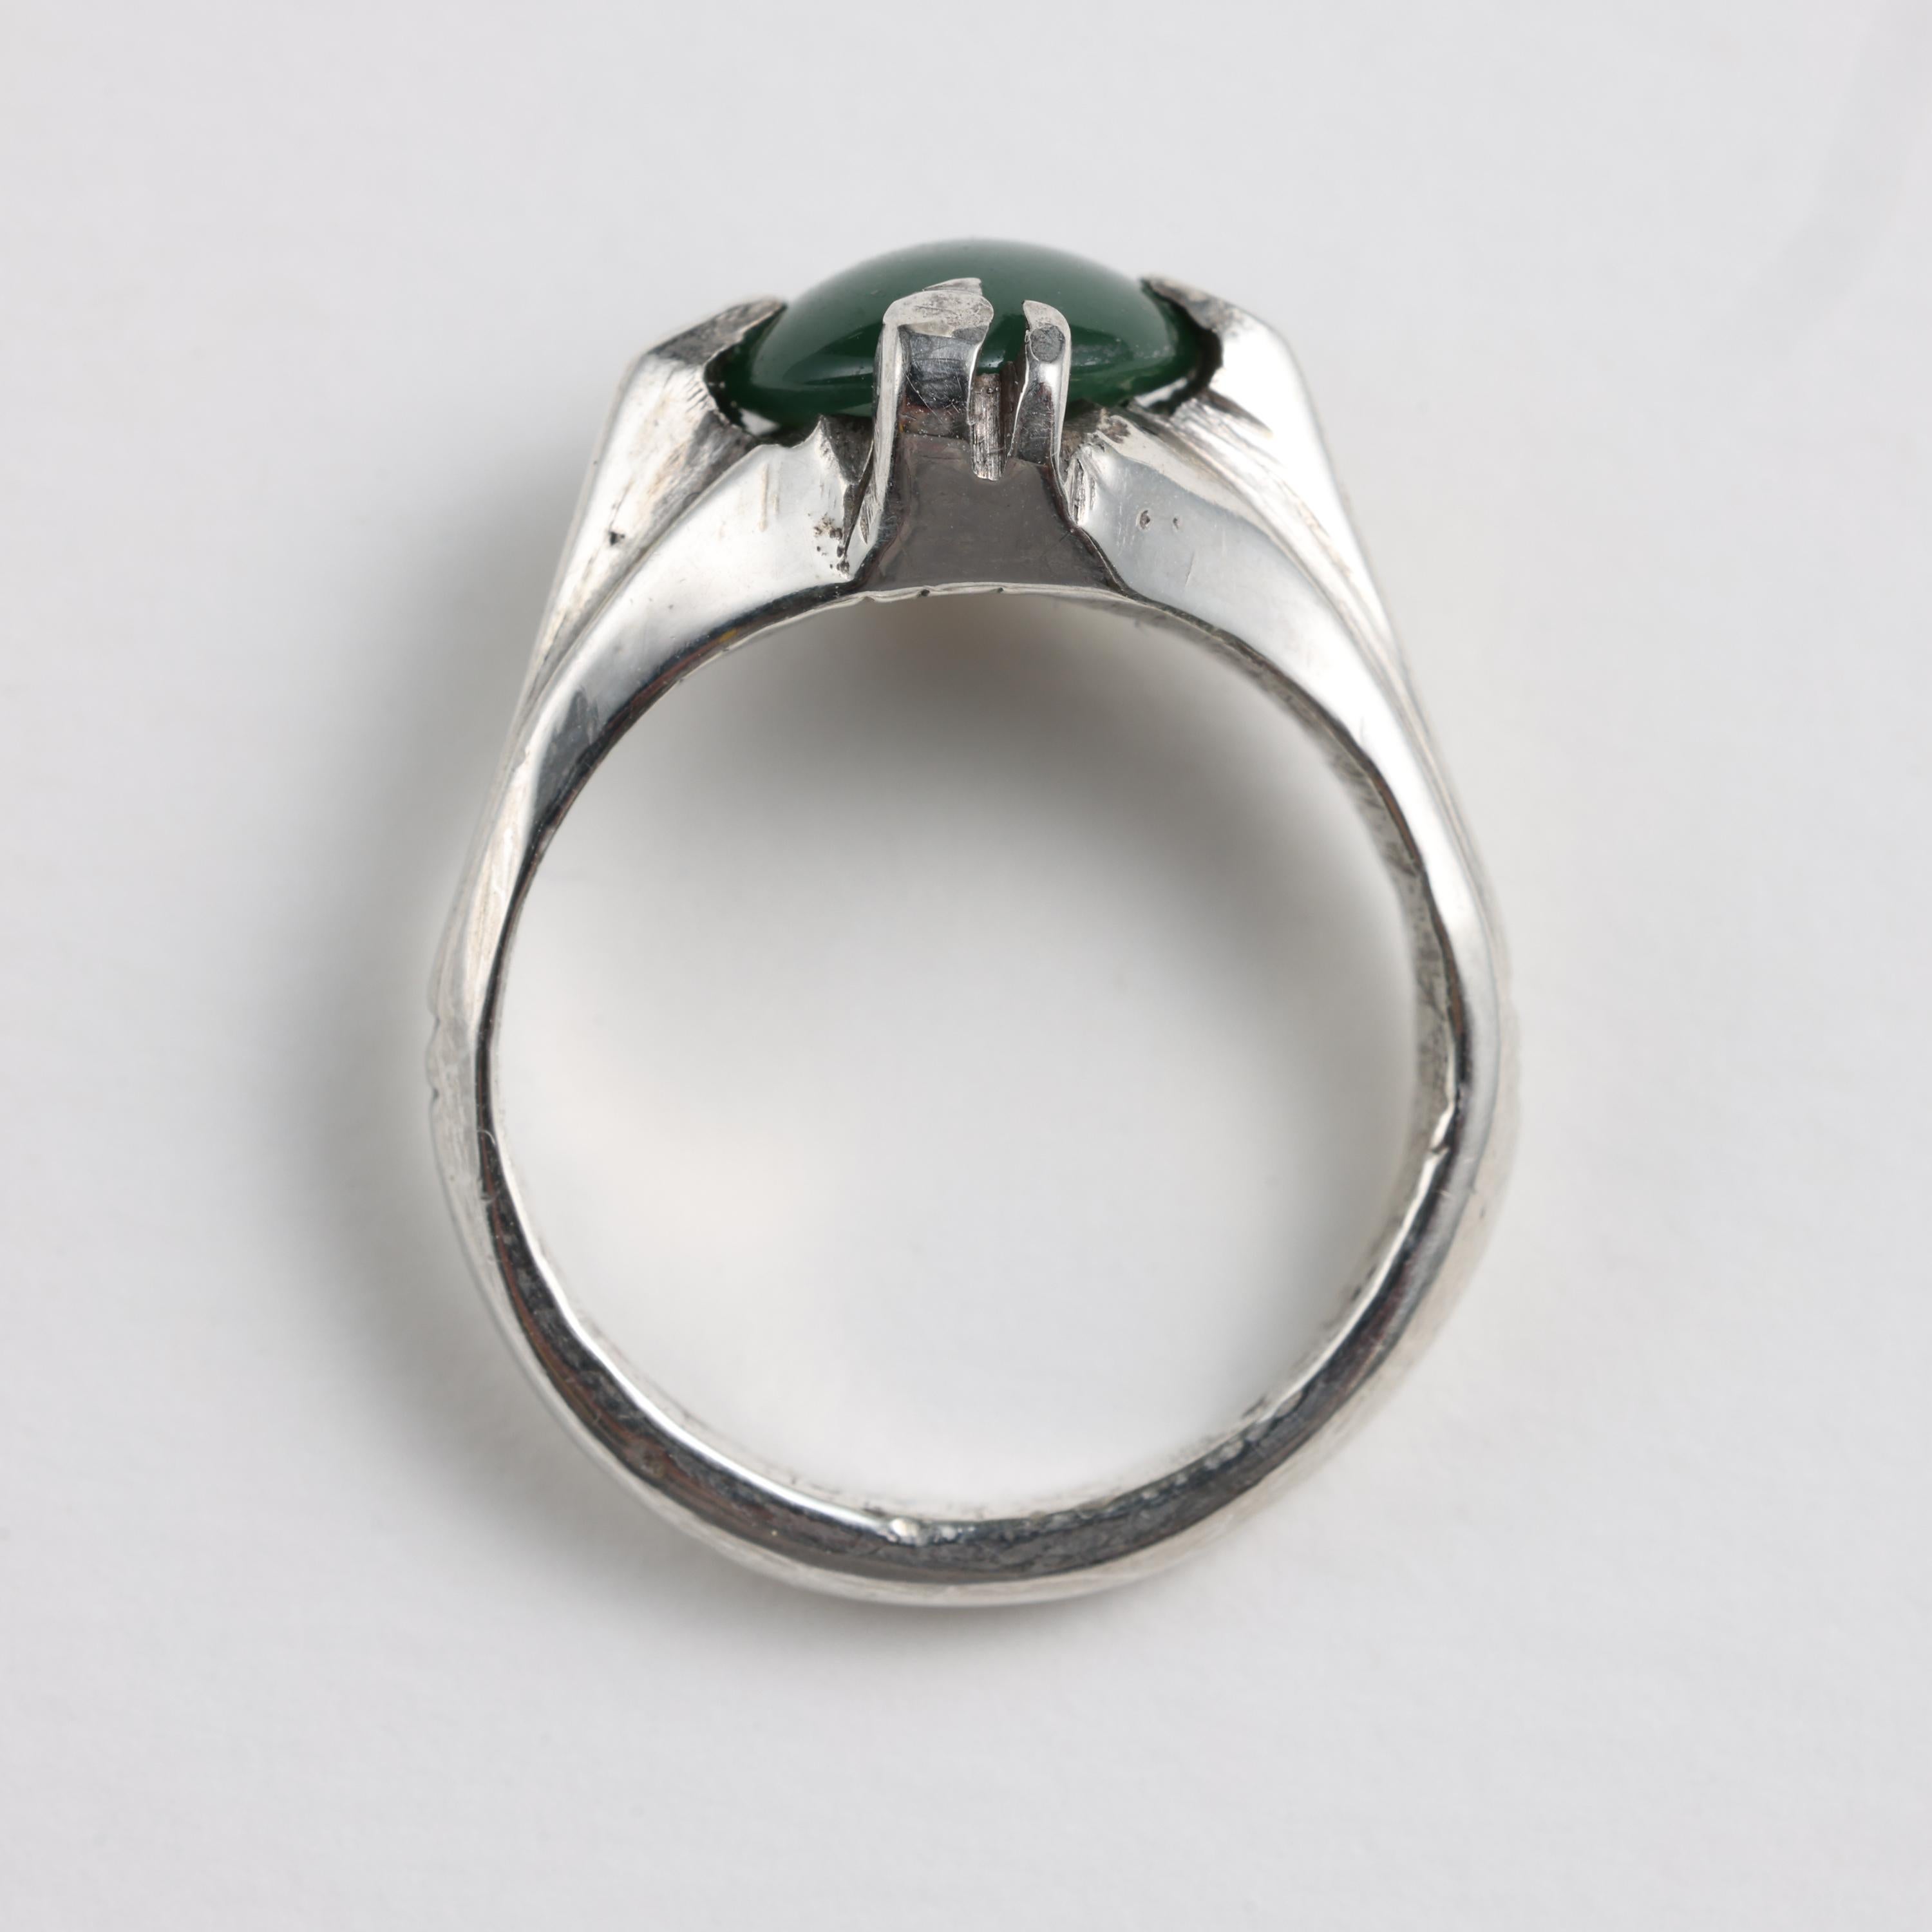 Omphacite Jade Ring in Silver, Certified Untreated Fei Cui 1